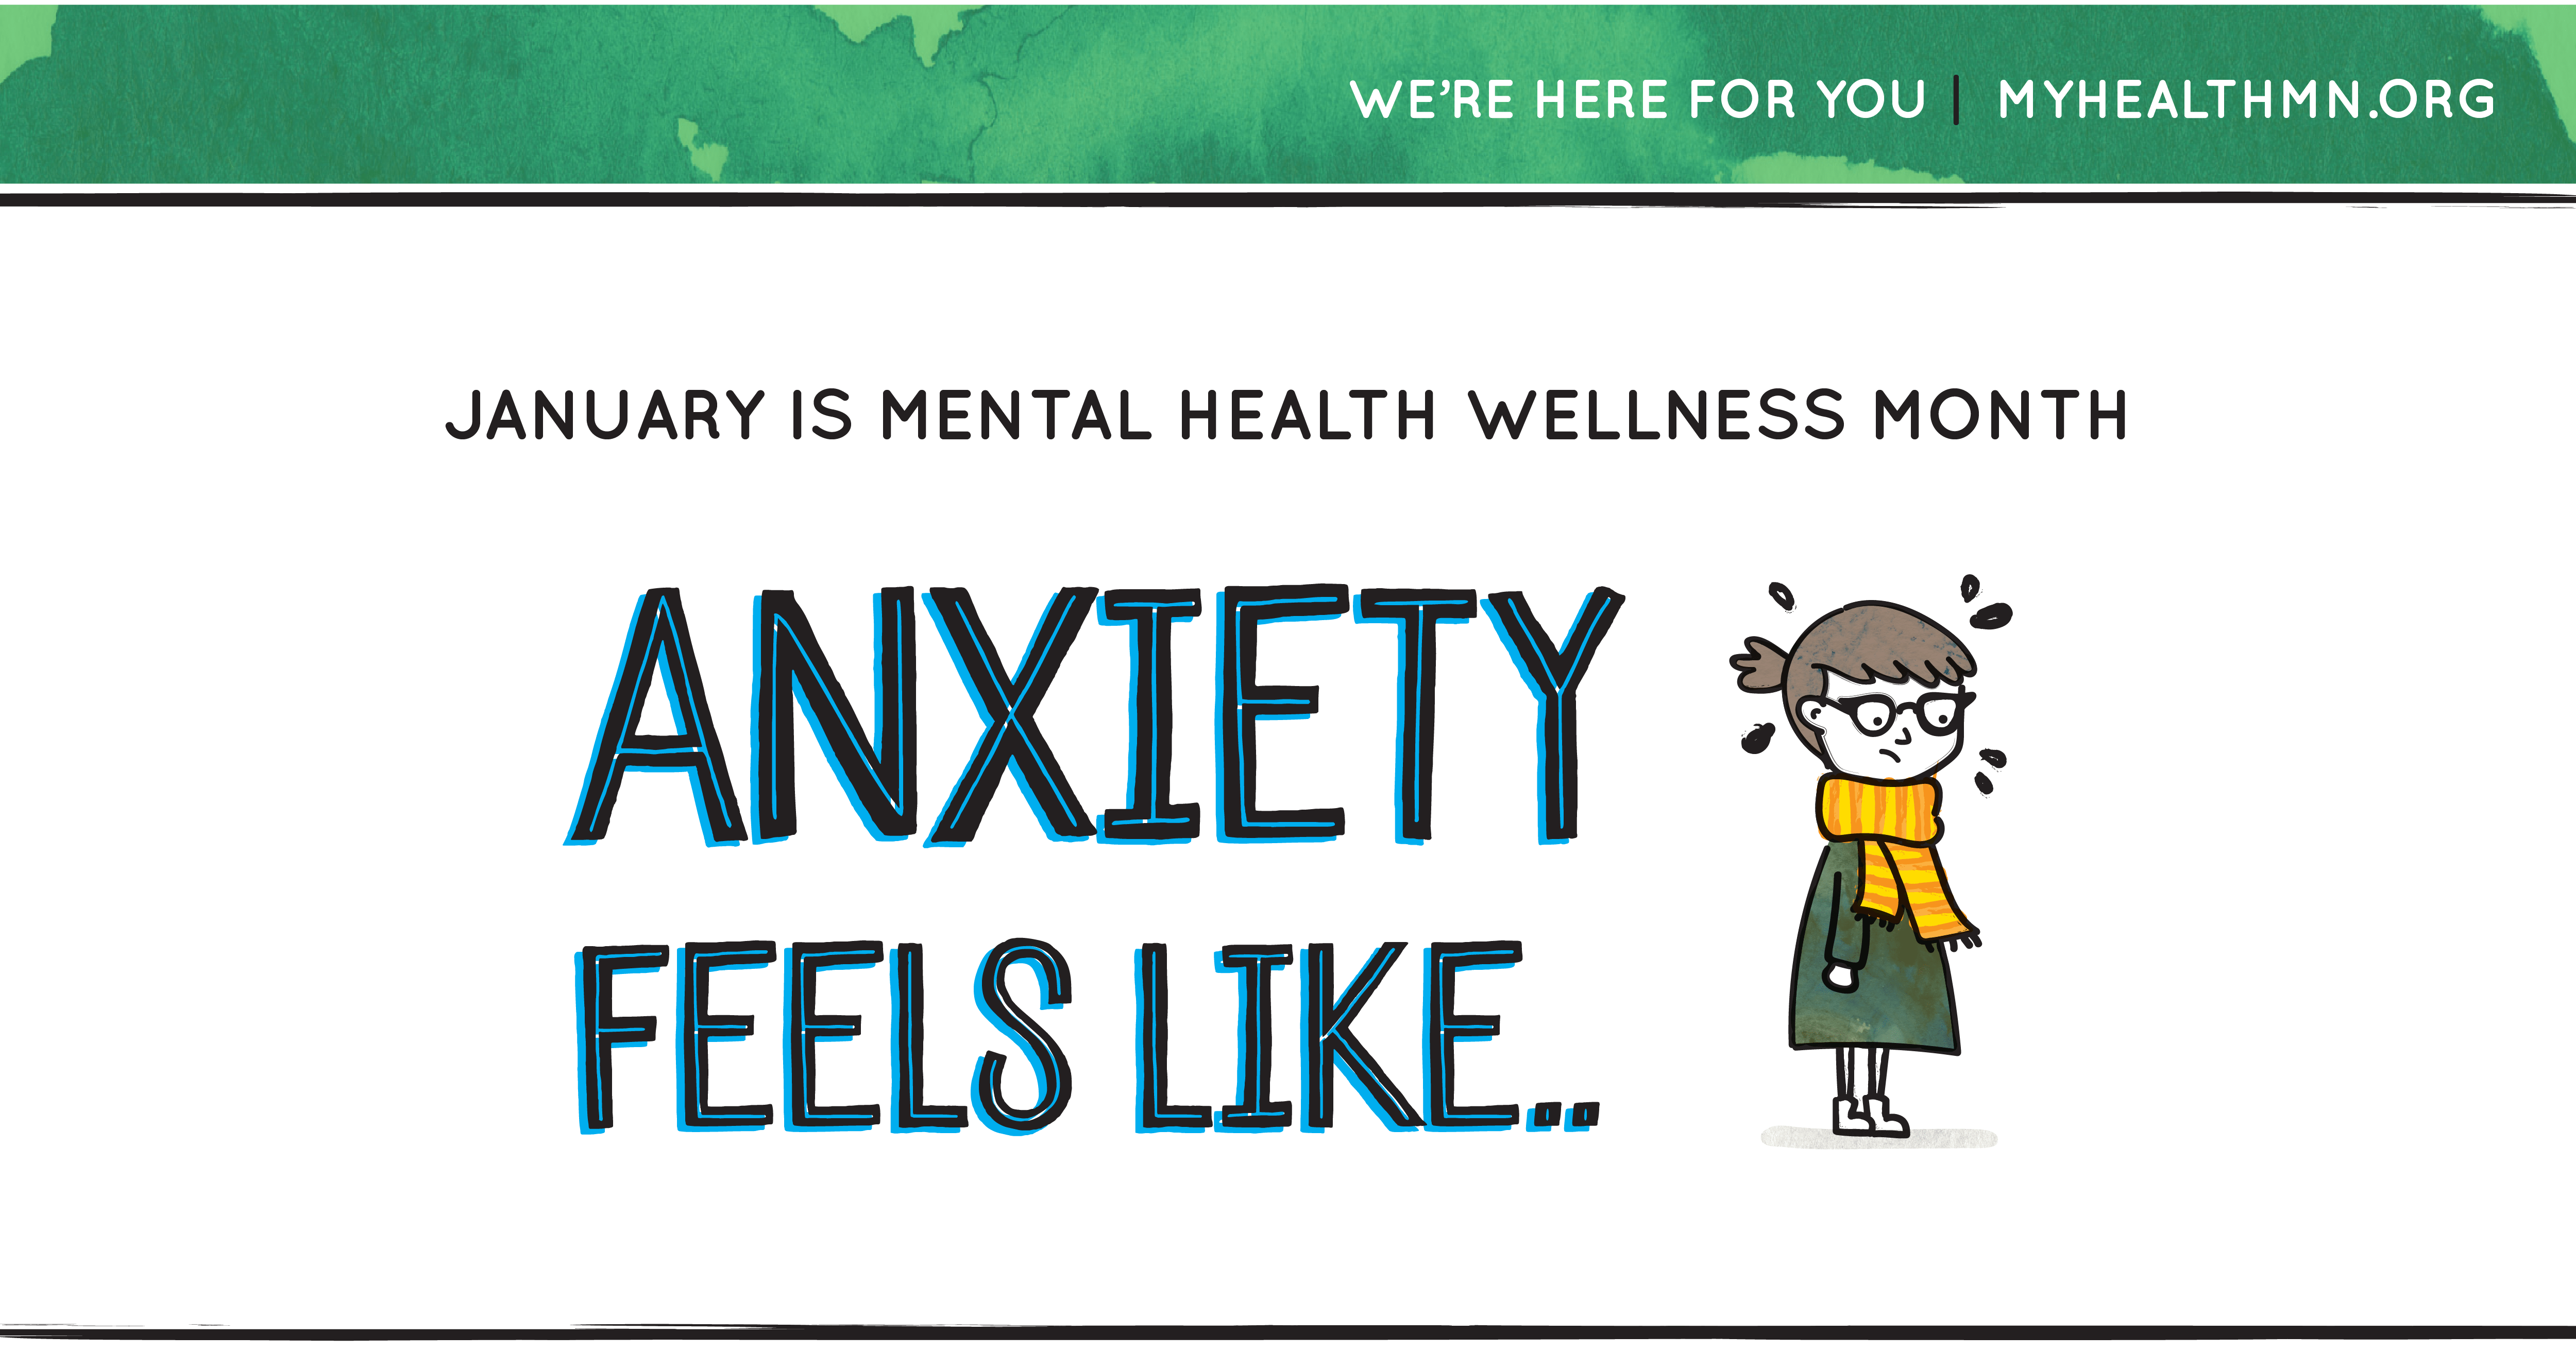 Anxiety. Ask for help. It's ok